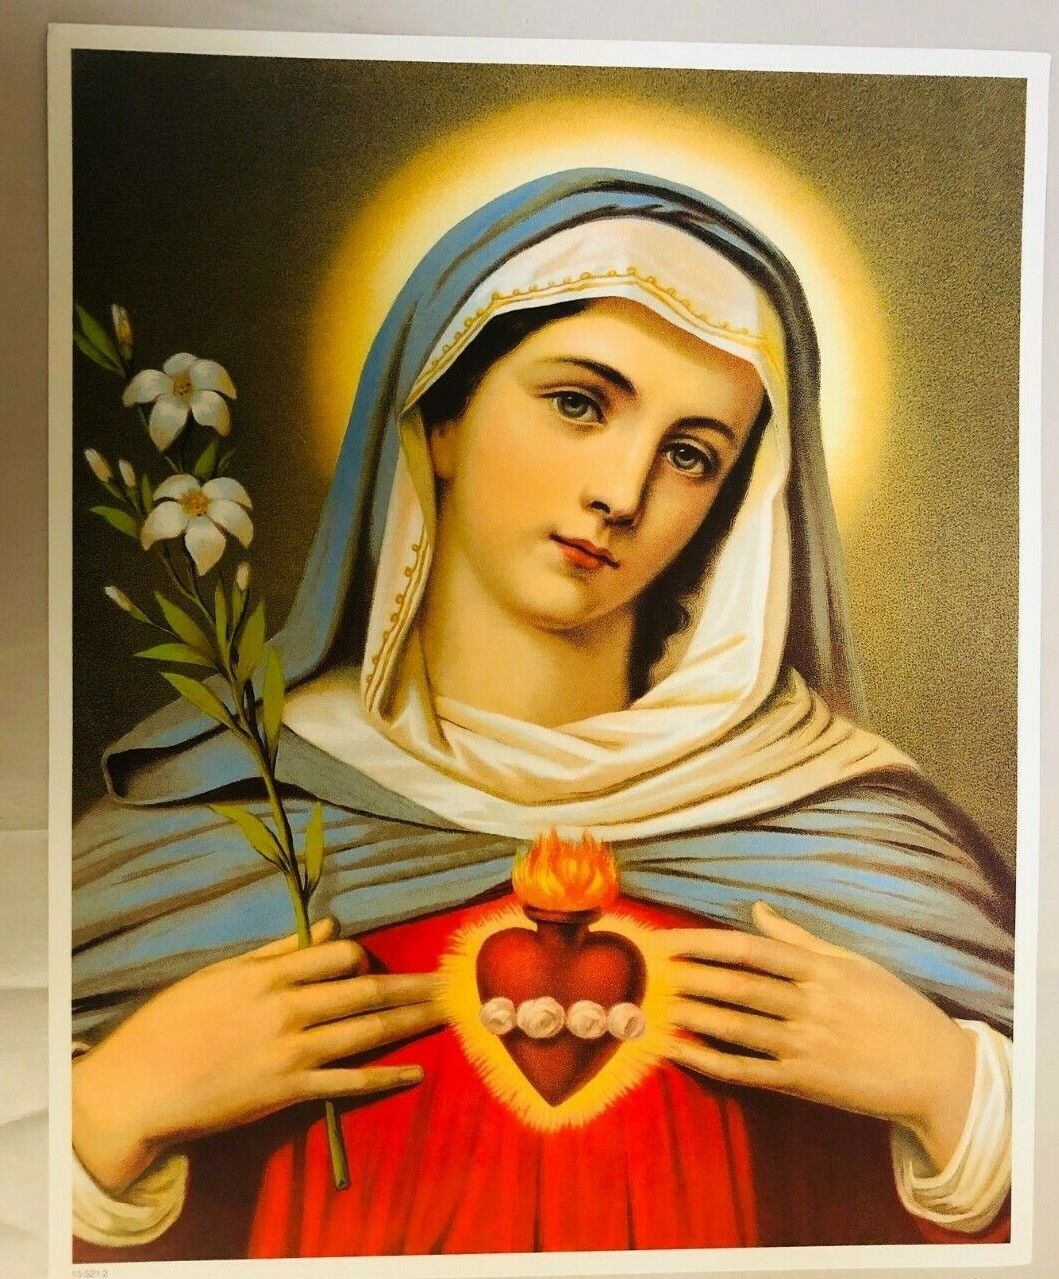 Sacred Heart of Mary Color Image/Print 8x10, New - Bob and Penny Lord